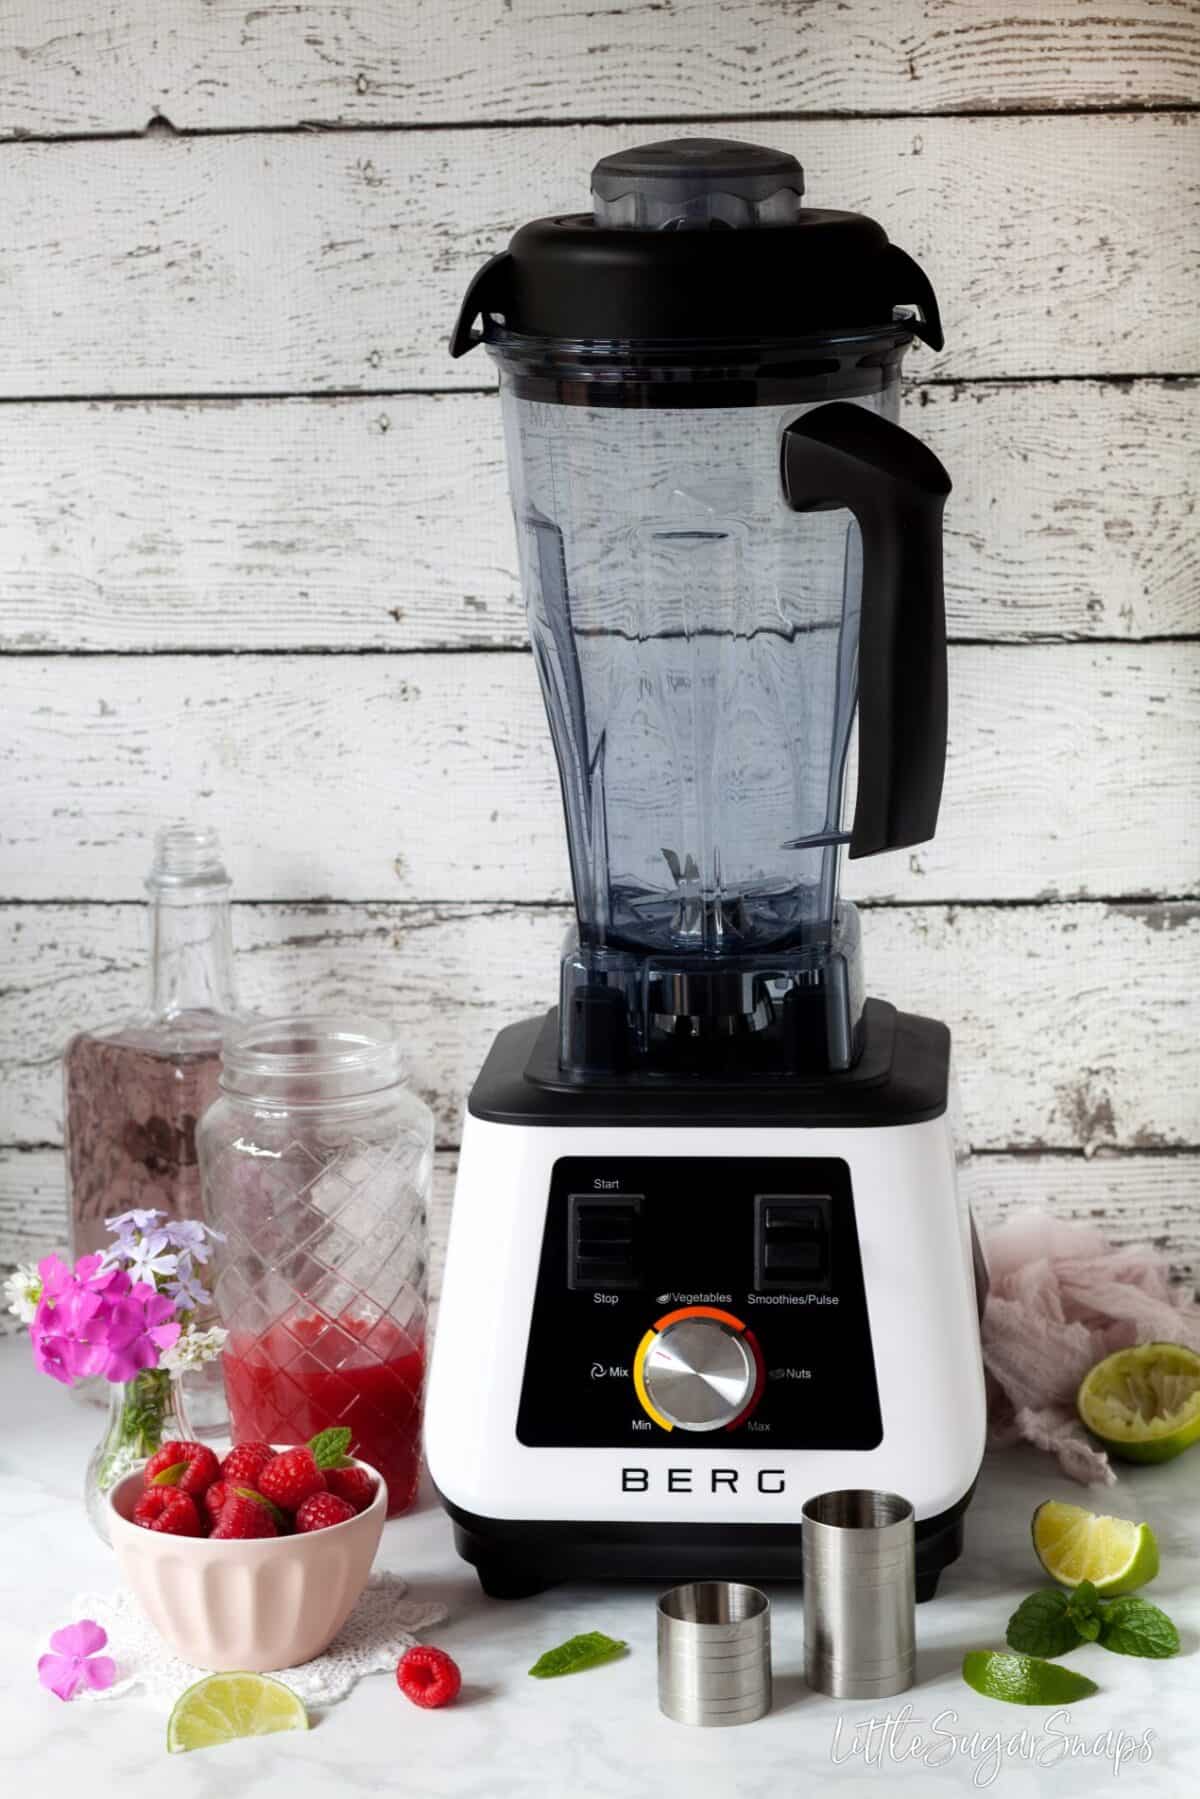 a Berg Innovations blender and ingredients for a drink alongside.